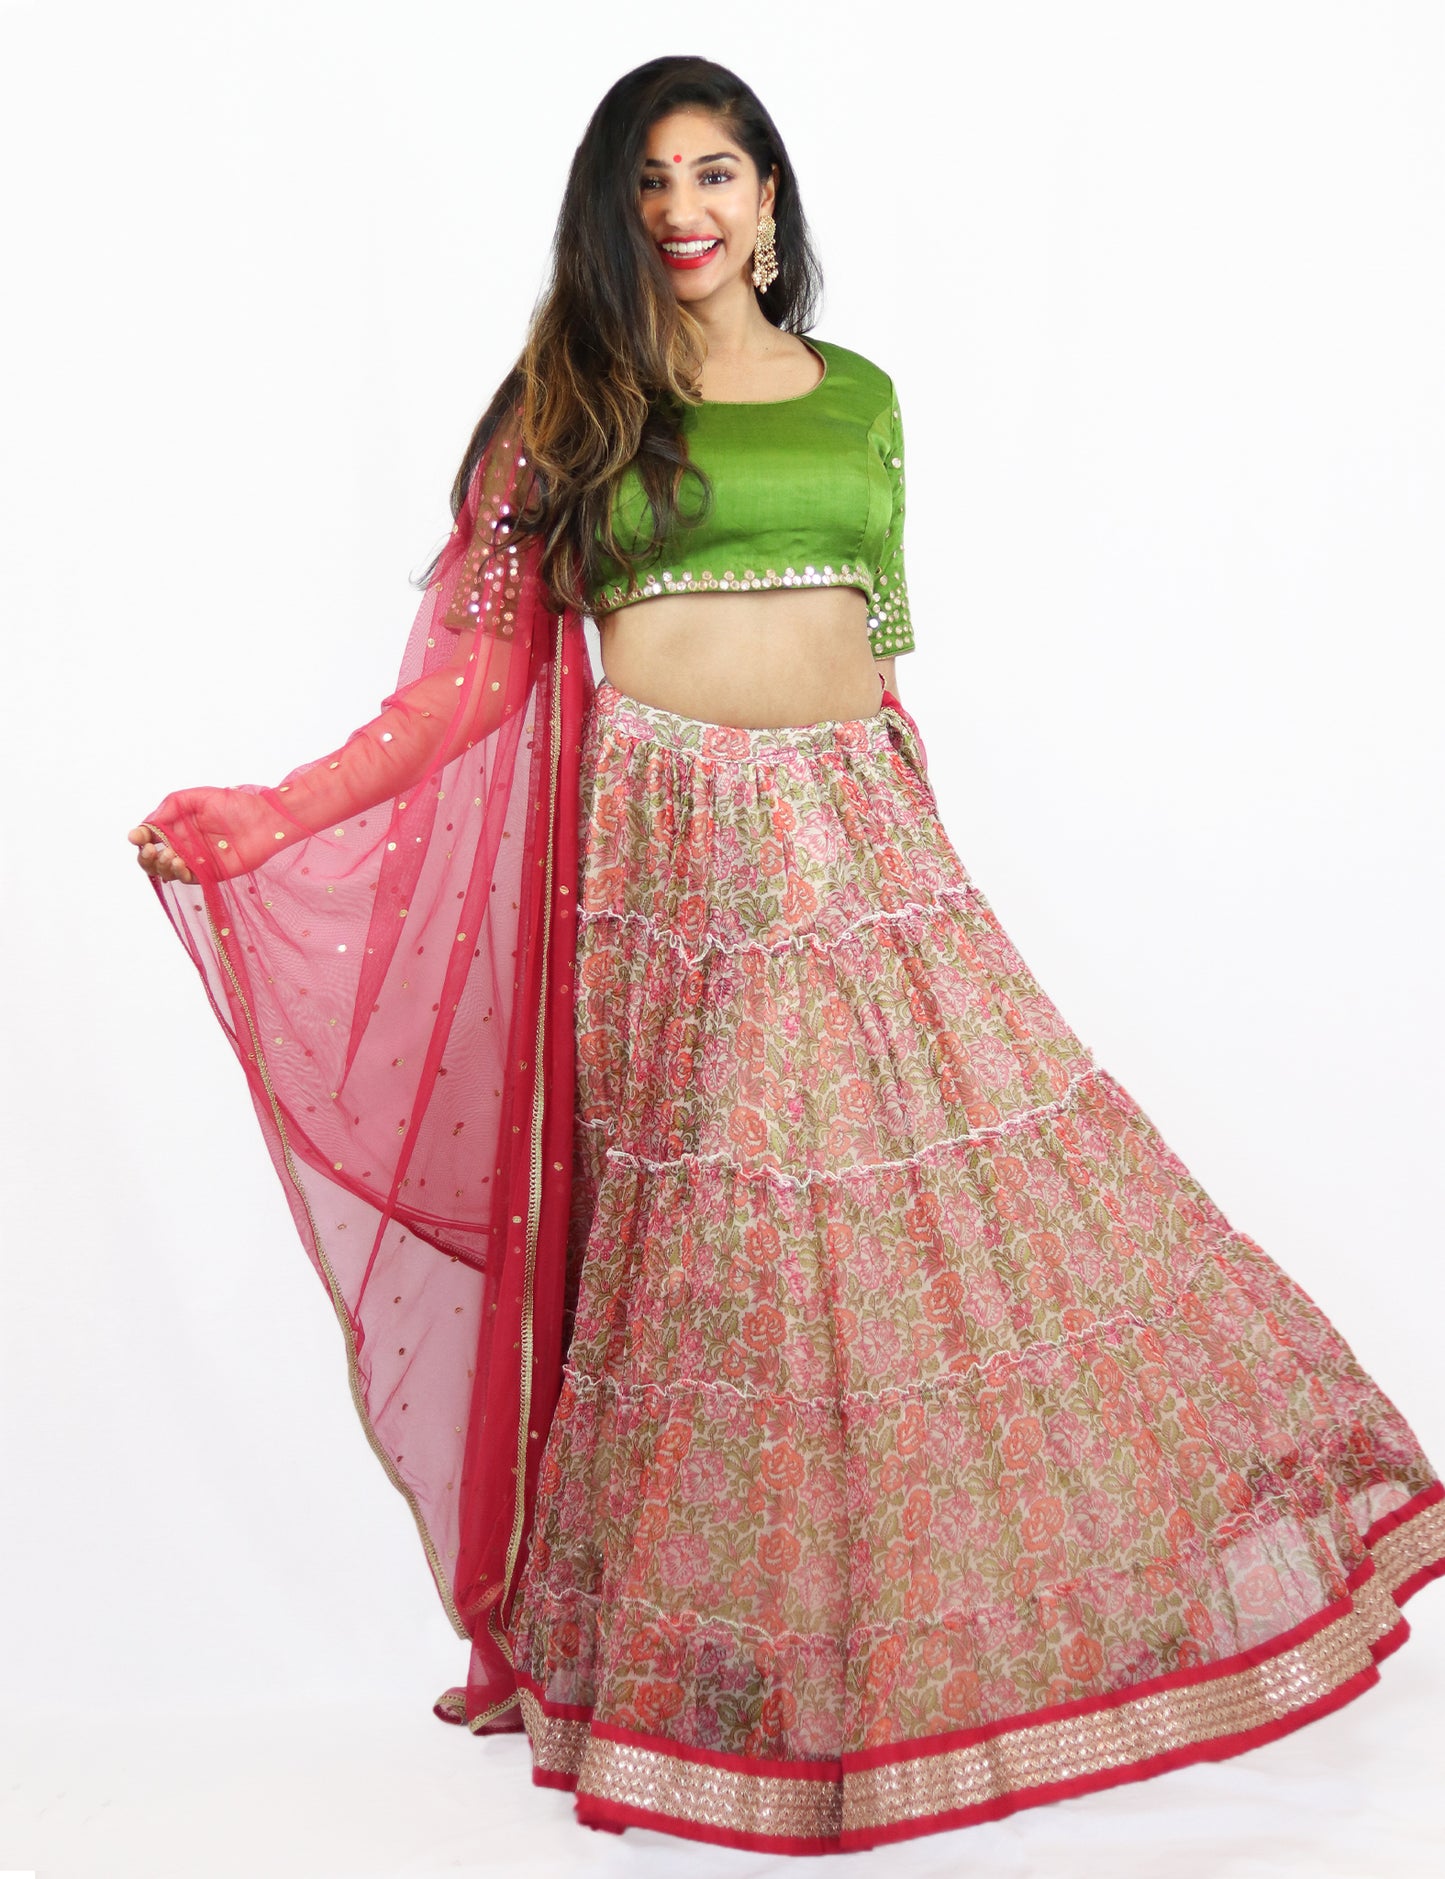 Rent Floral Lehenga with Green Blouse & Punch Pink Dupatta